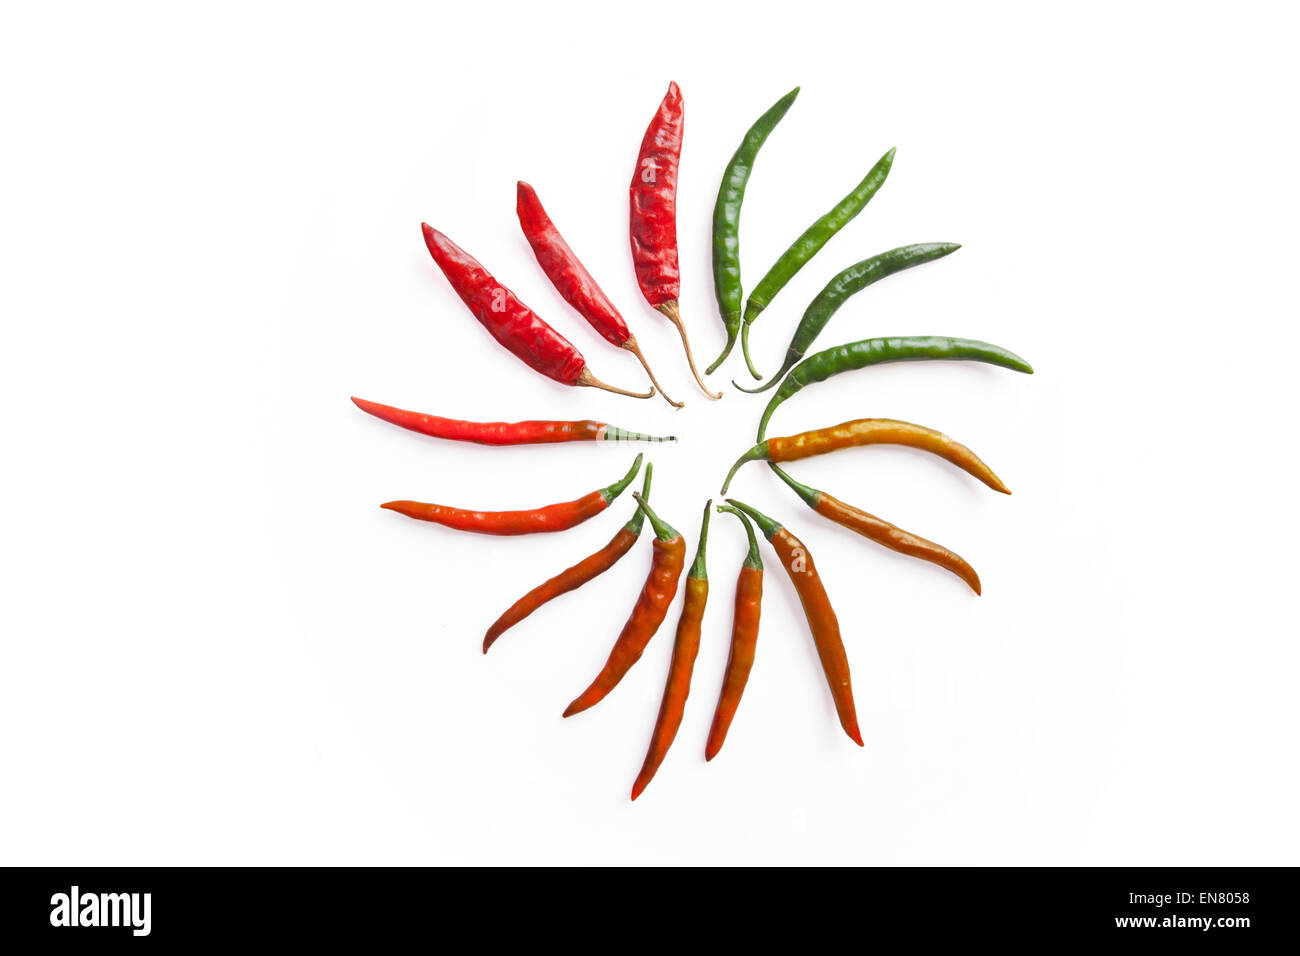 Red and green chilli peppers in the circle shaped Stock Photo